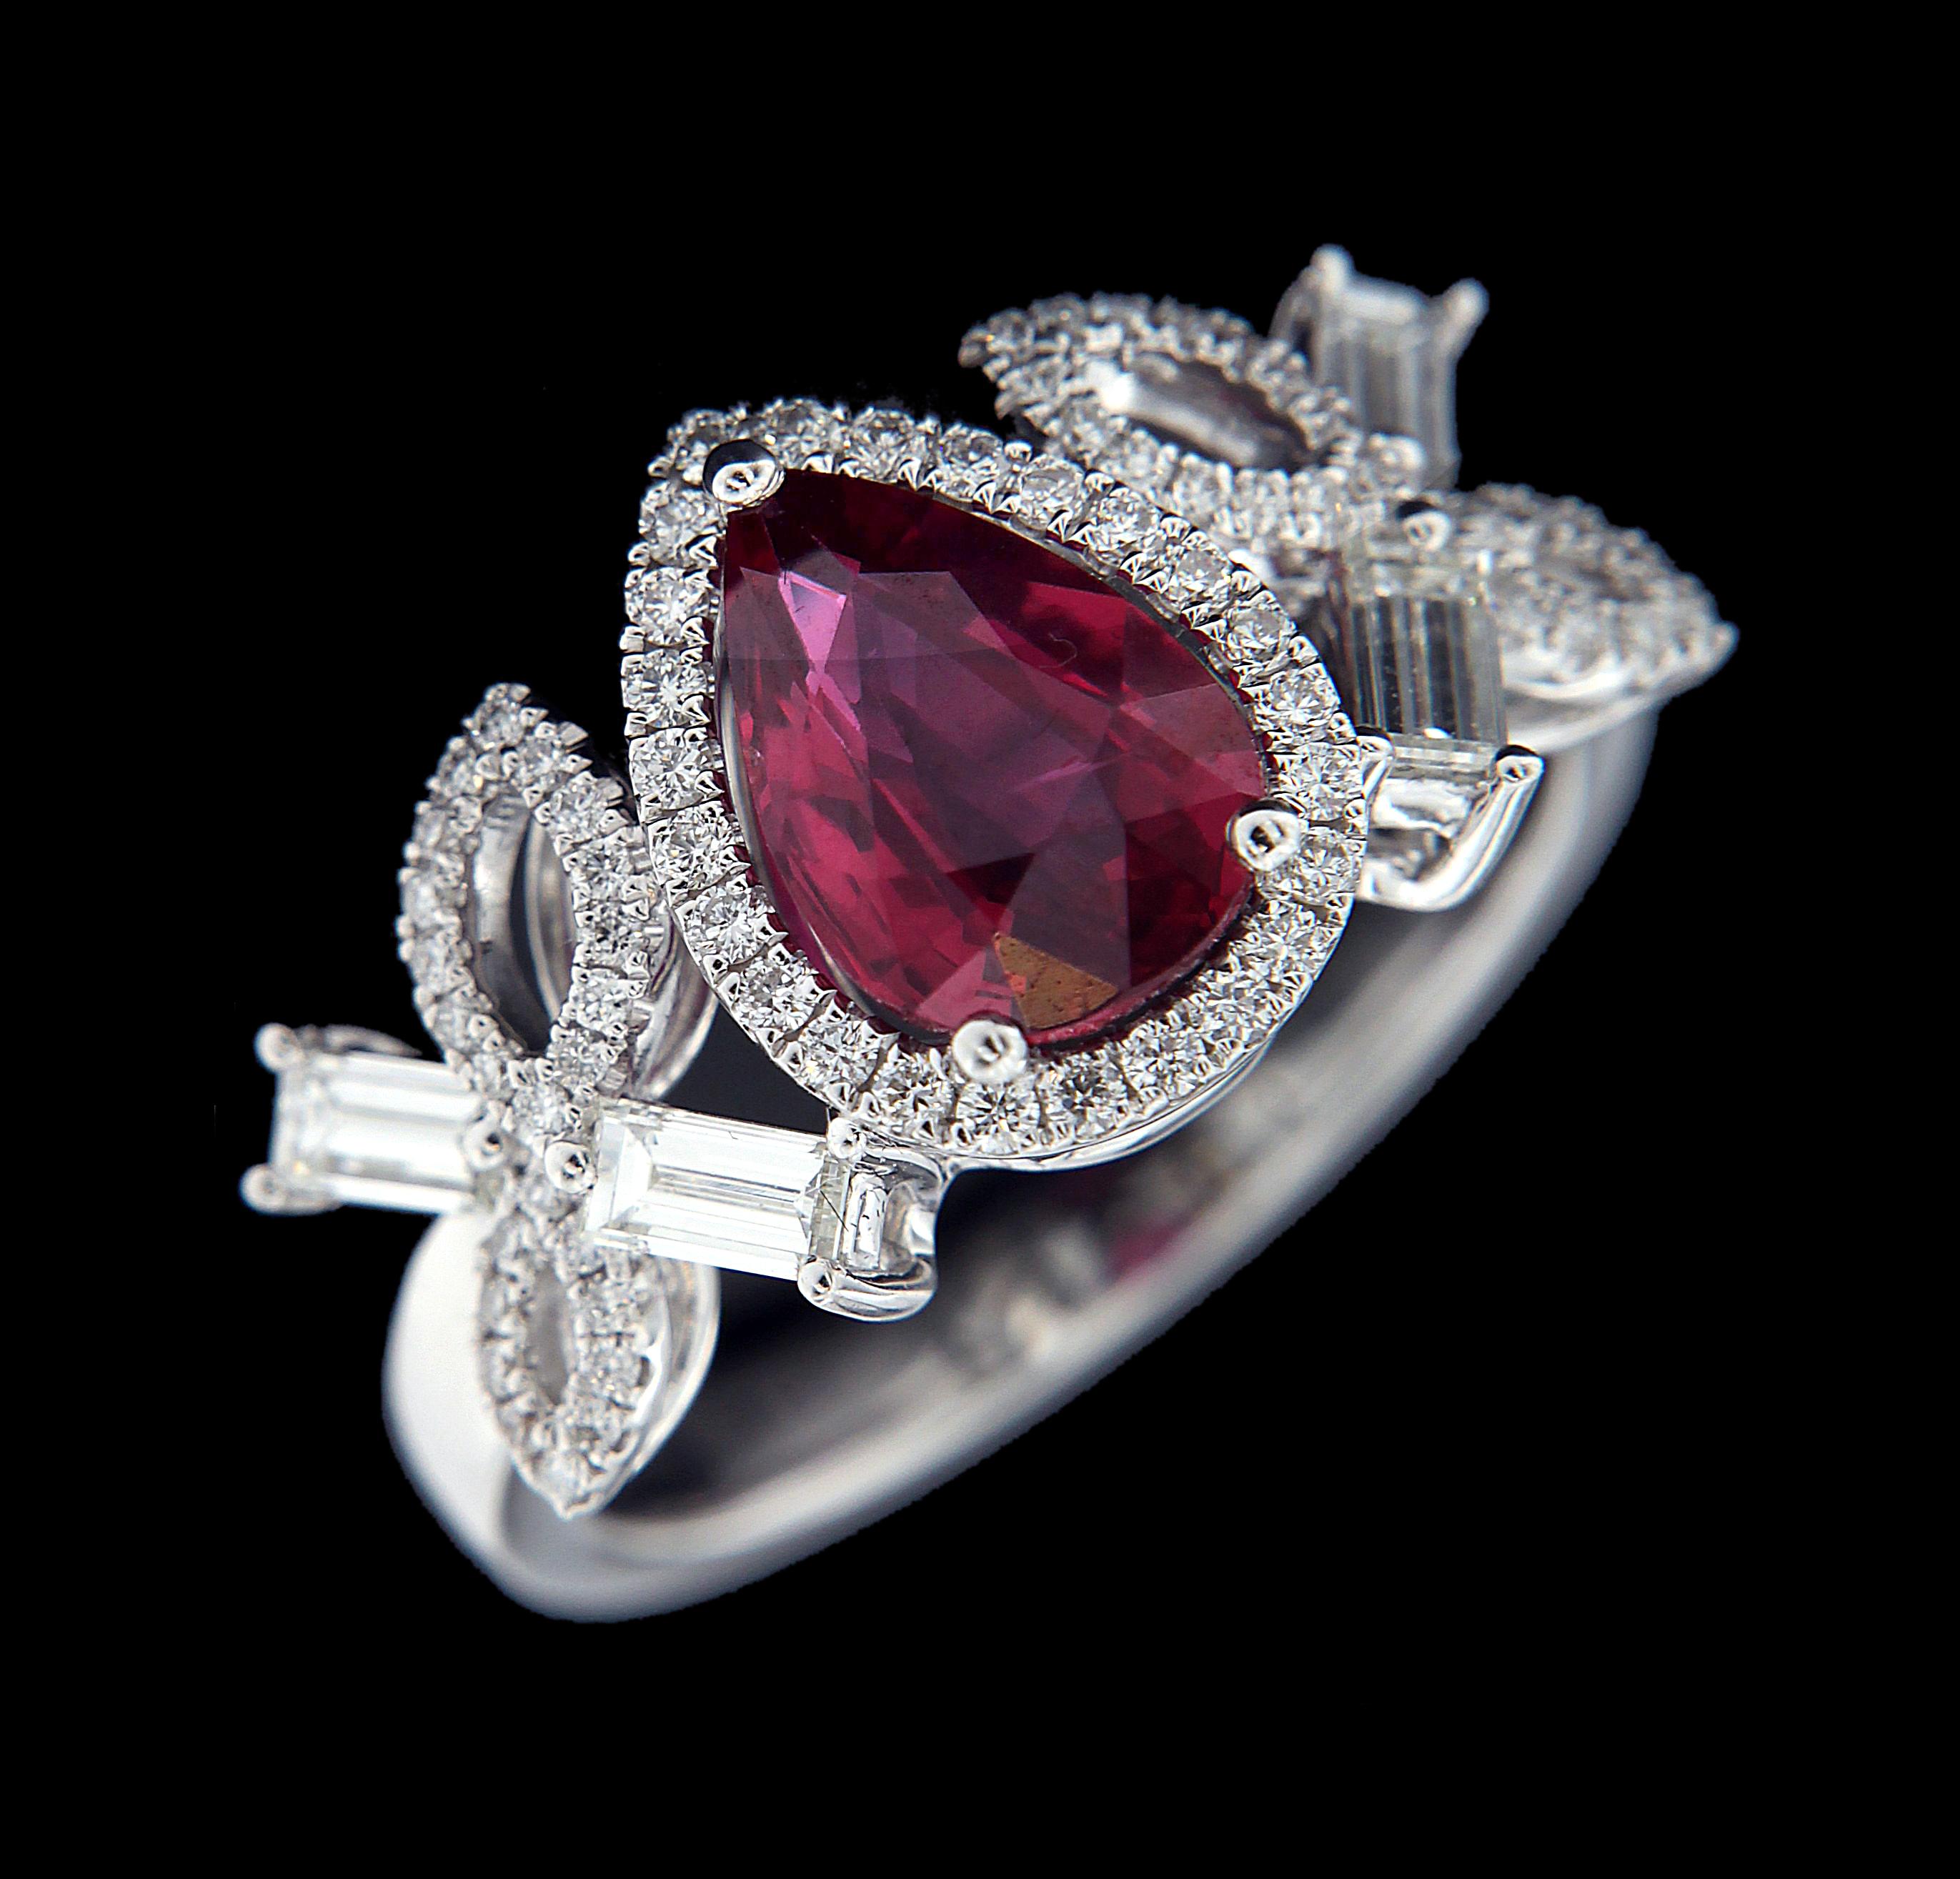 Exceptional 18 Karat  White Gold, Diamond And Ruby Ring.

Rings:
Diamonds of approximately 0.785 carats, rubies approximately of 2.120 carats mounted on 18 karat white gold ring. The ring weighs approximately around 6.049 grams.

Please note: The